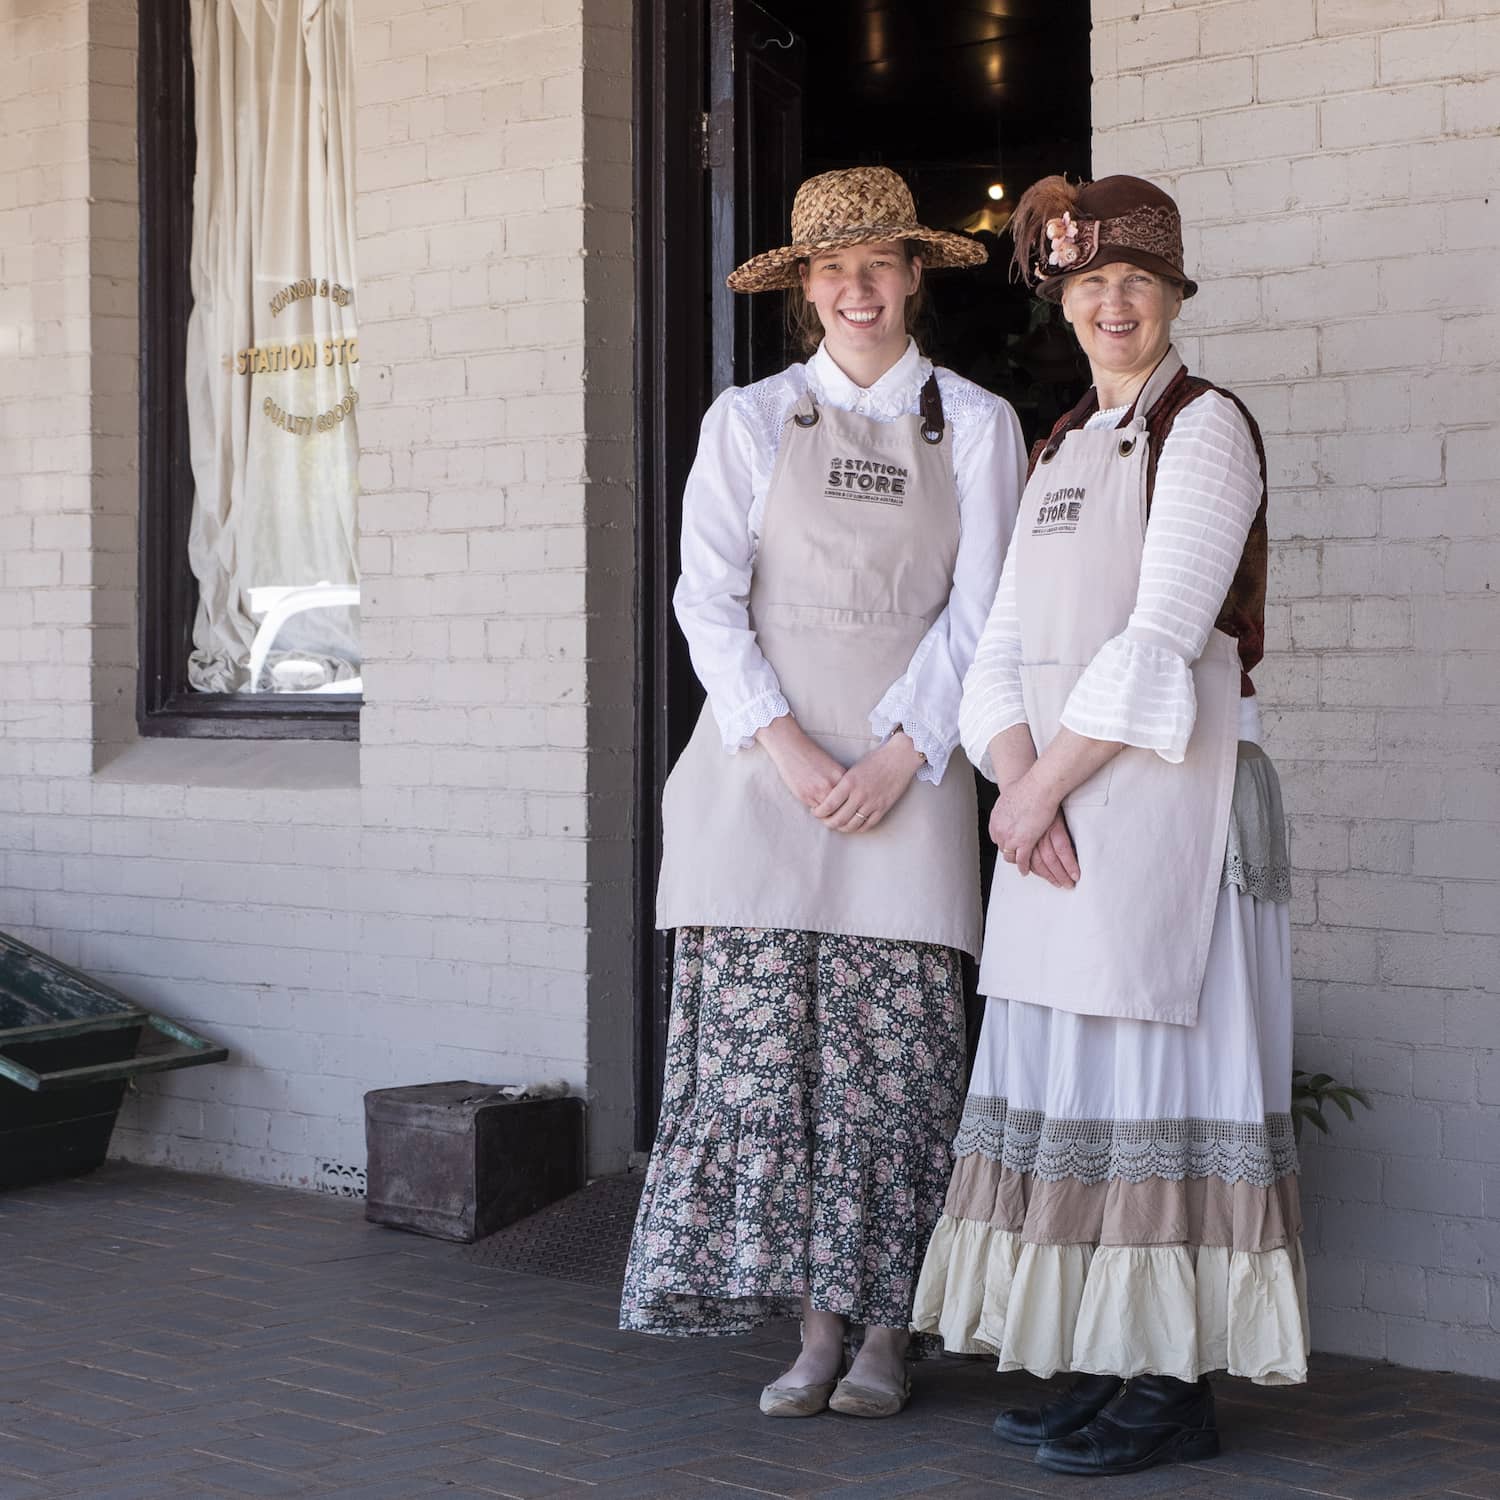 Sarah and Marisse Kinnon standing at the front door of The Station Store, Longreach